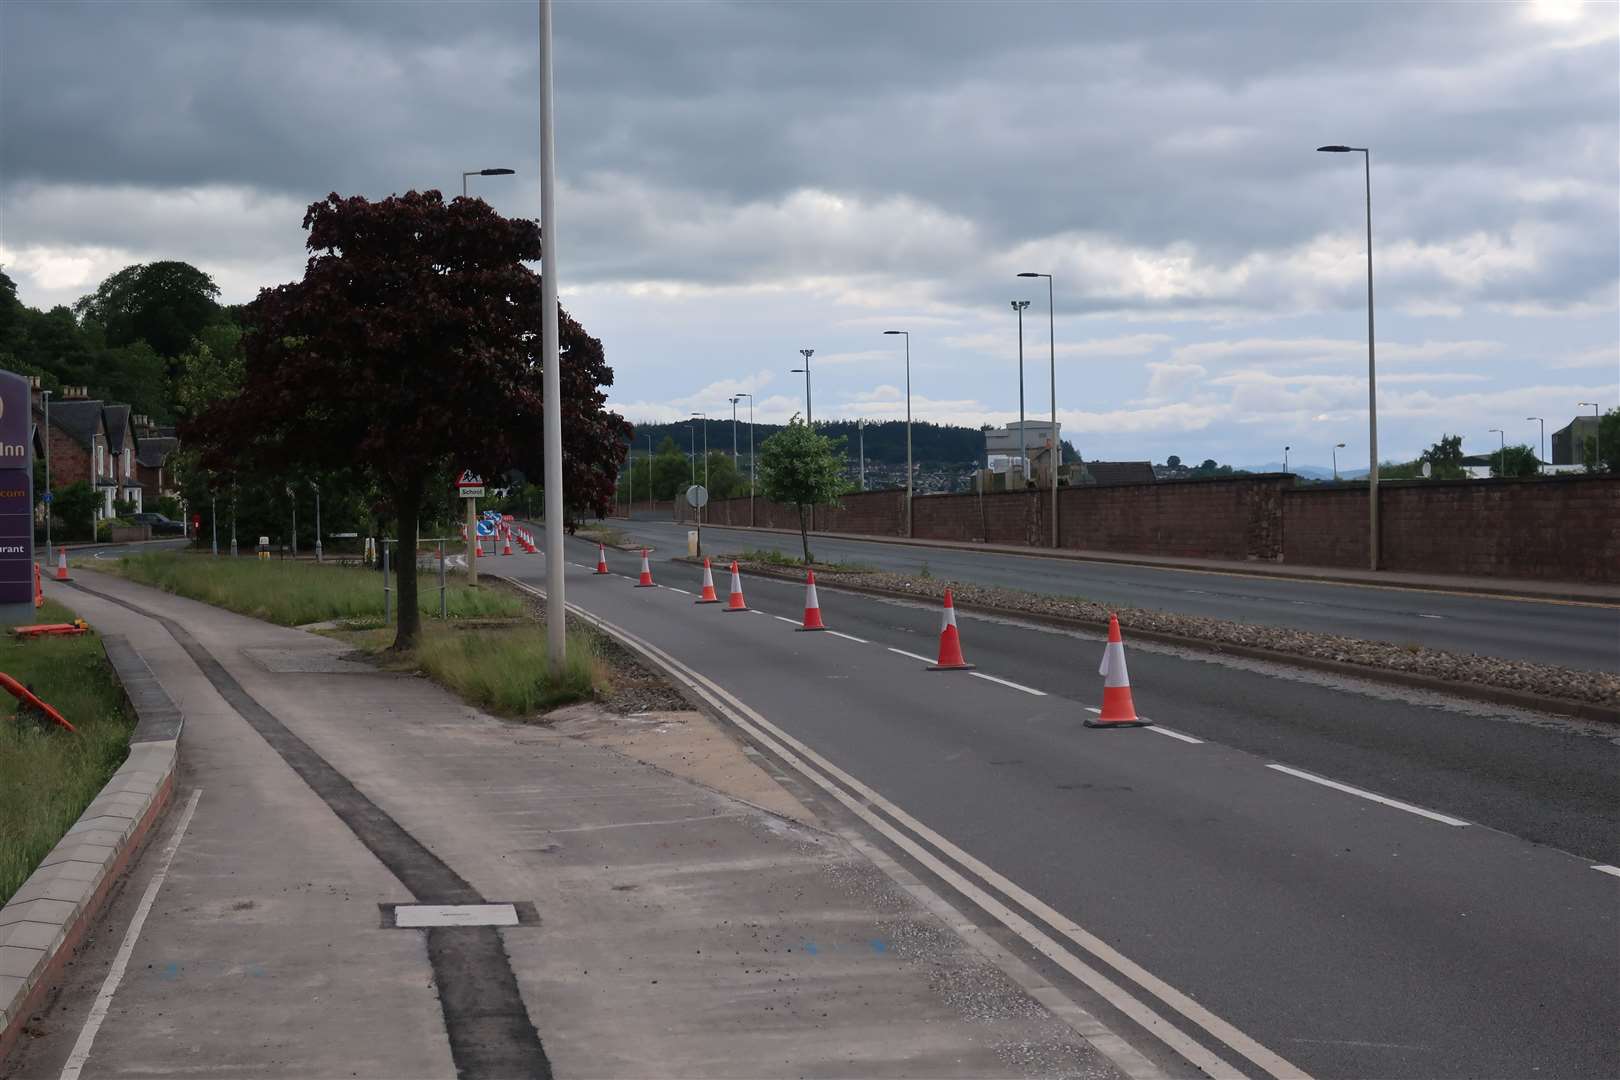 These cones on Millburn Road are for essential infrastructure works - but they show the lane which will be used as a two-way cycle route as part of measures to increase space for social distancing.